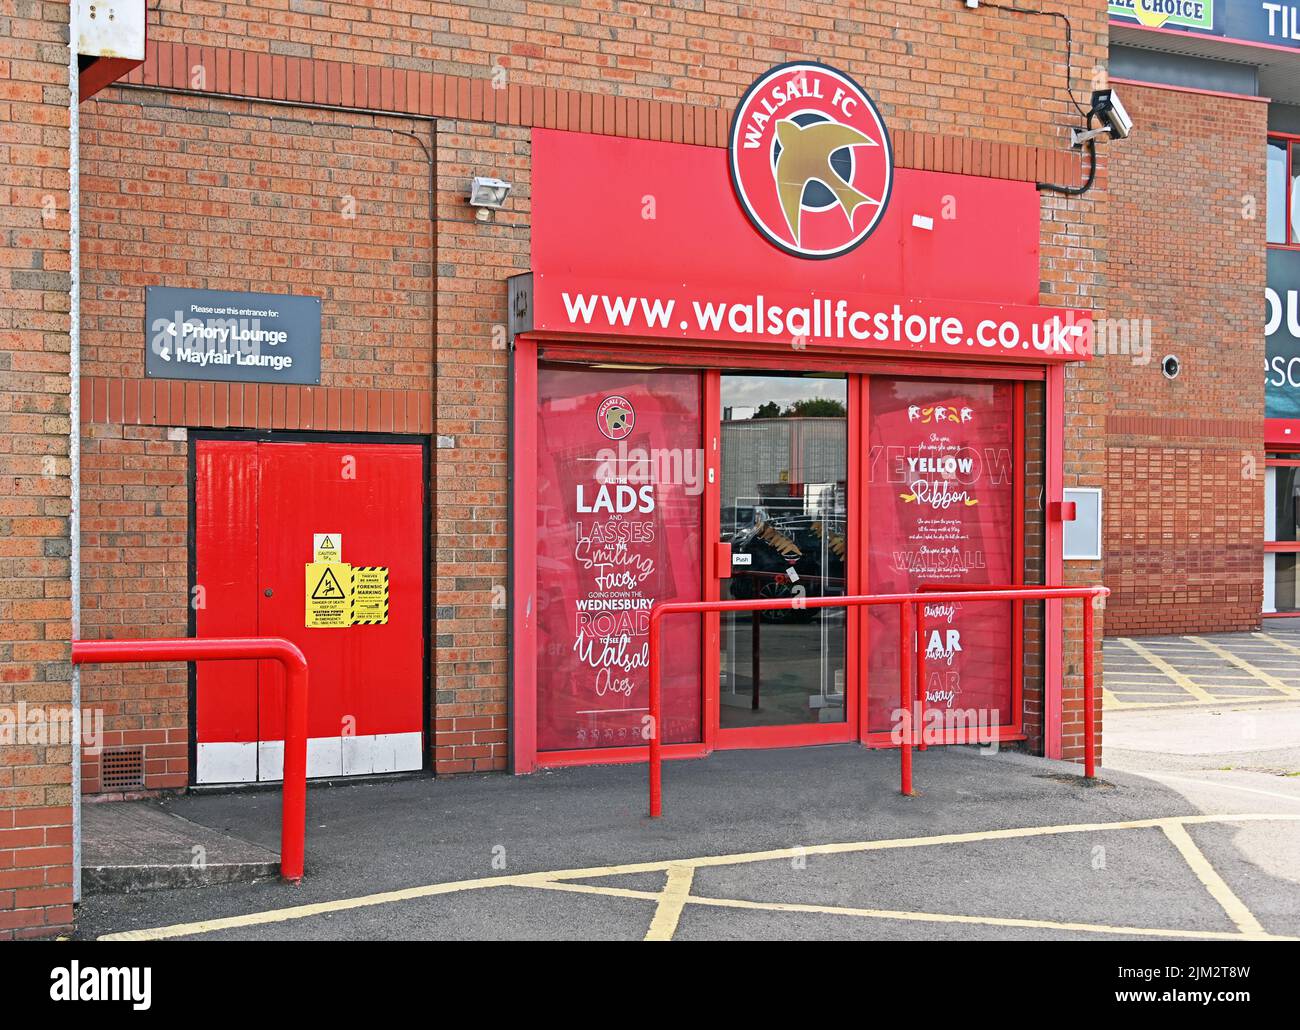 Il Walsall F.C. Conservare. Stadio Bescot Poundland. Walsall Football Club Ground. Walsall, West Midlands, Inghilterra, Regno Unito, Europa. Foto Stock